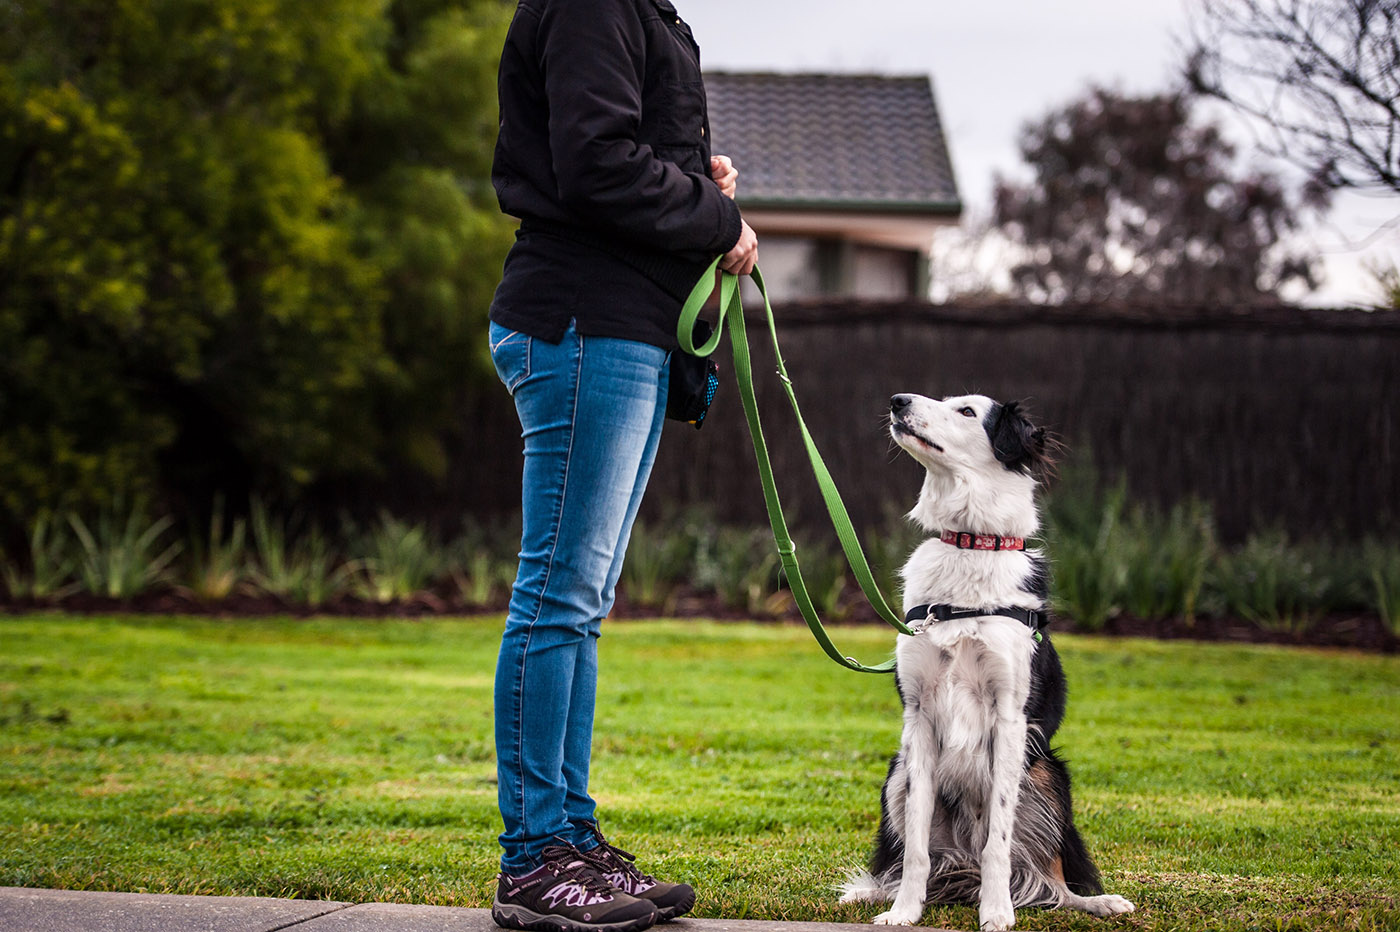  Dog training on looking away and focus - From A Dog's View